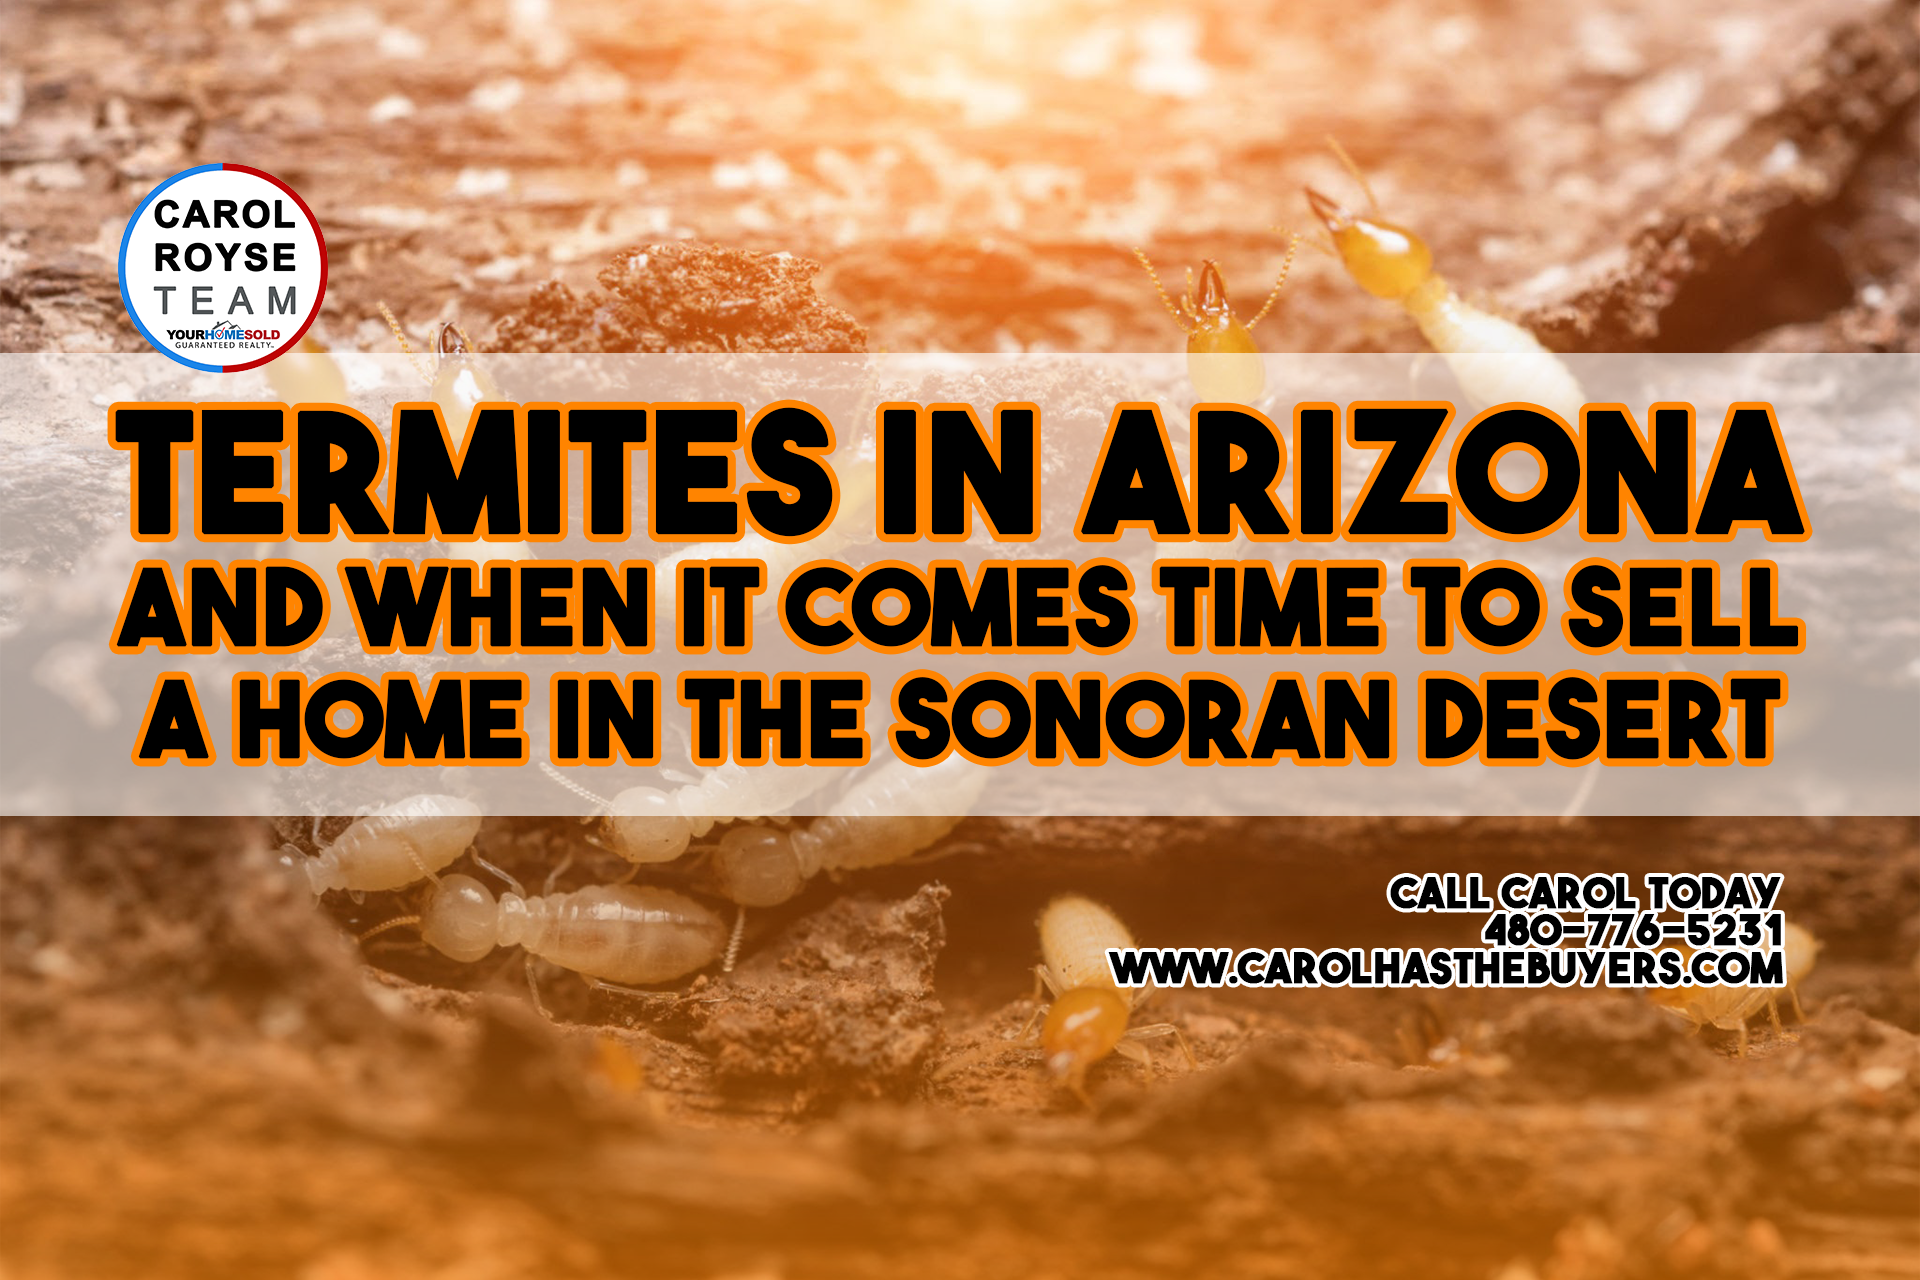 Termites in Arizona and When it Comes Time to Sell a Home in the Sonoran Desert